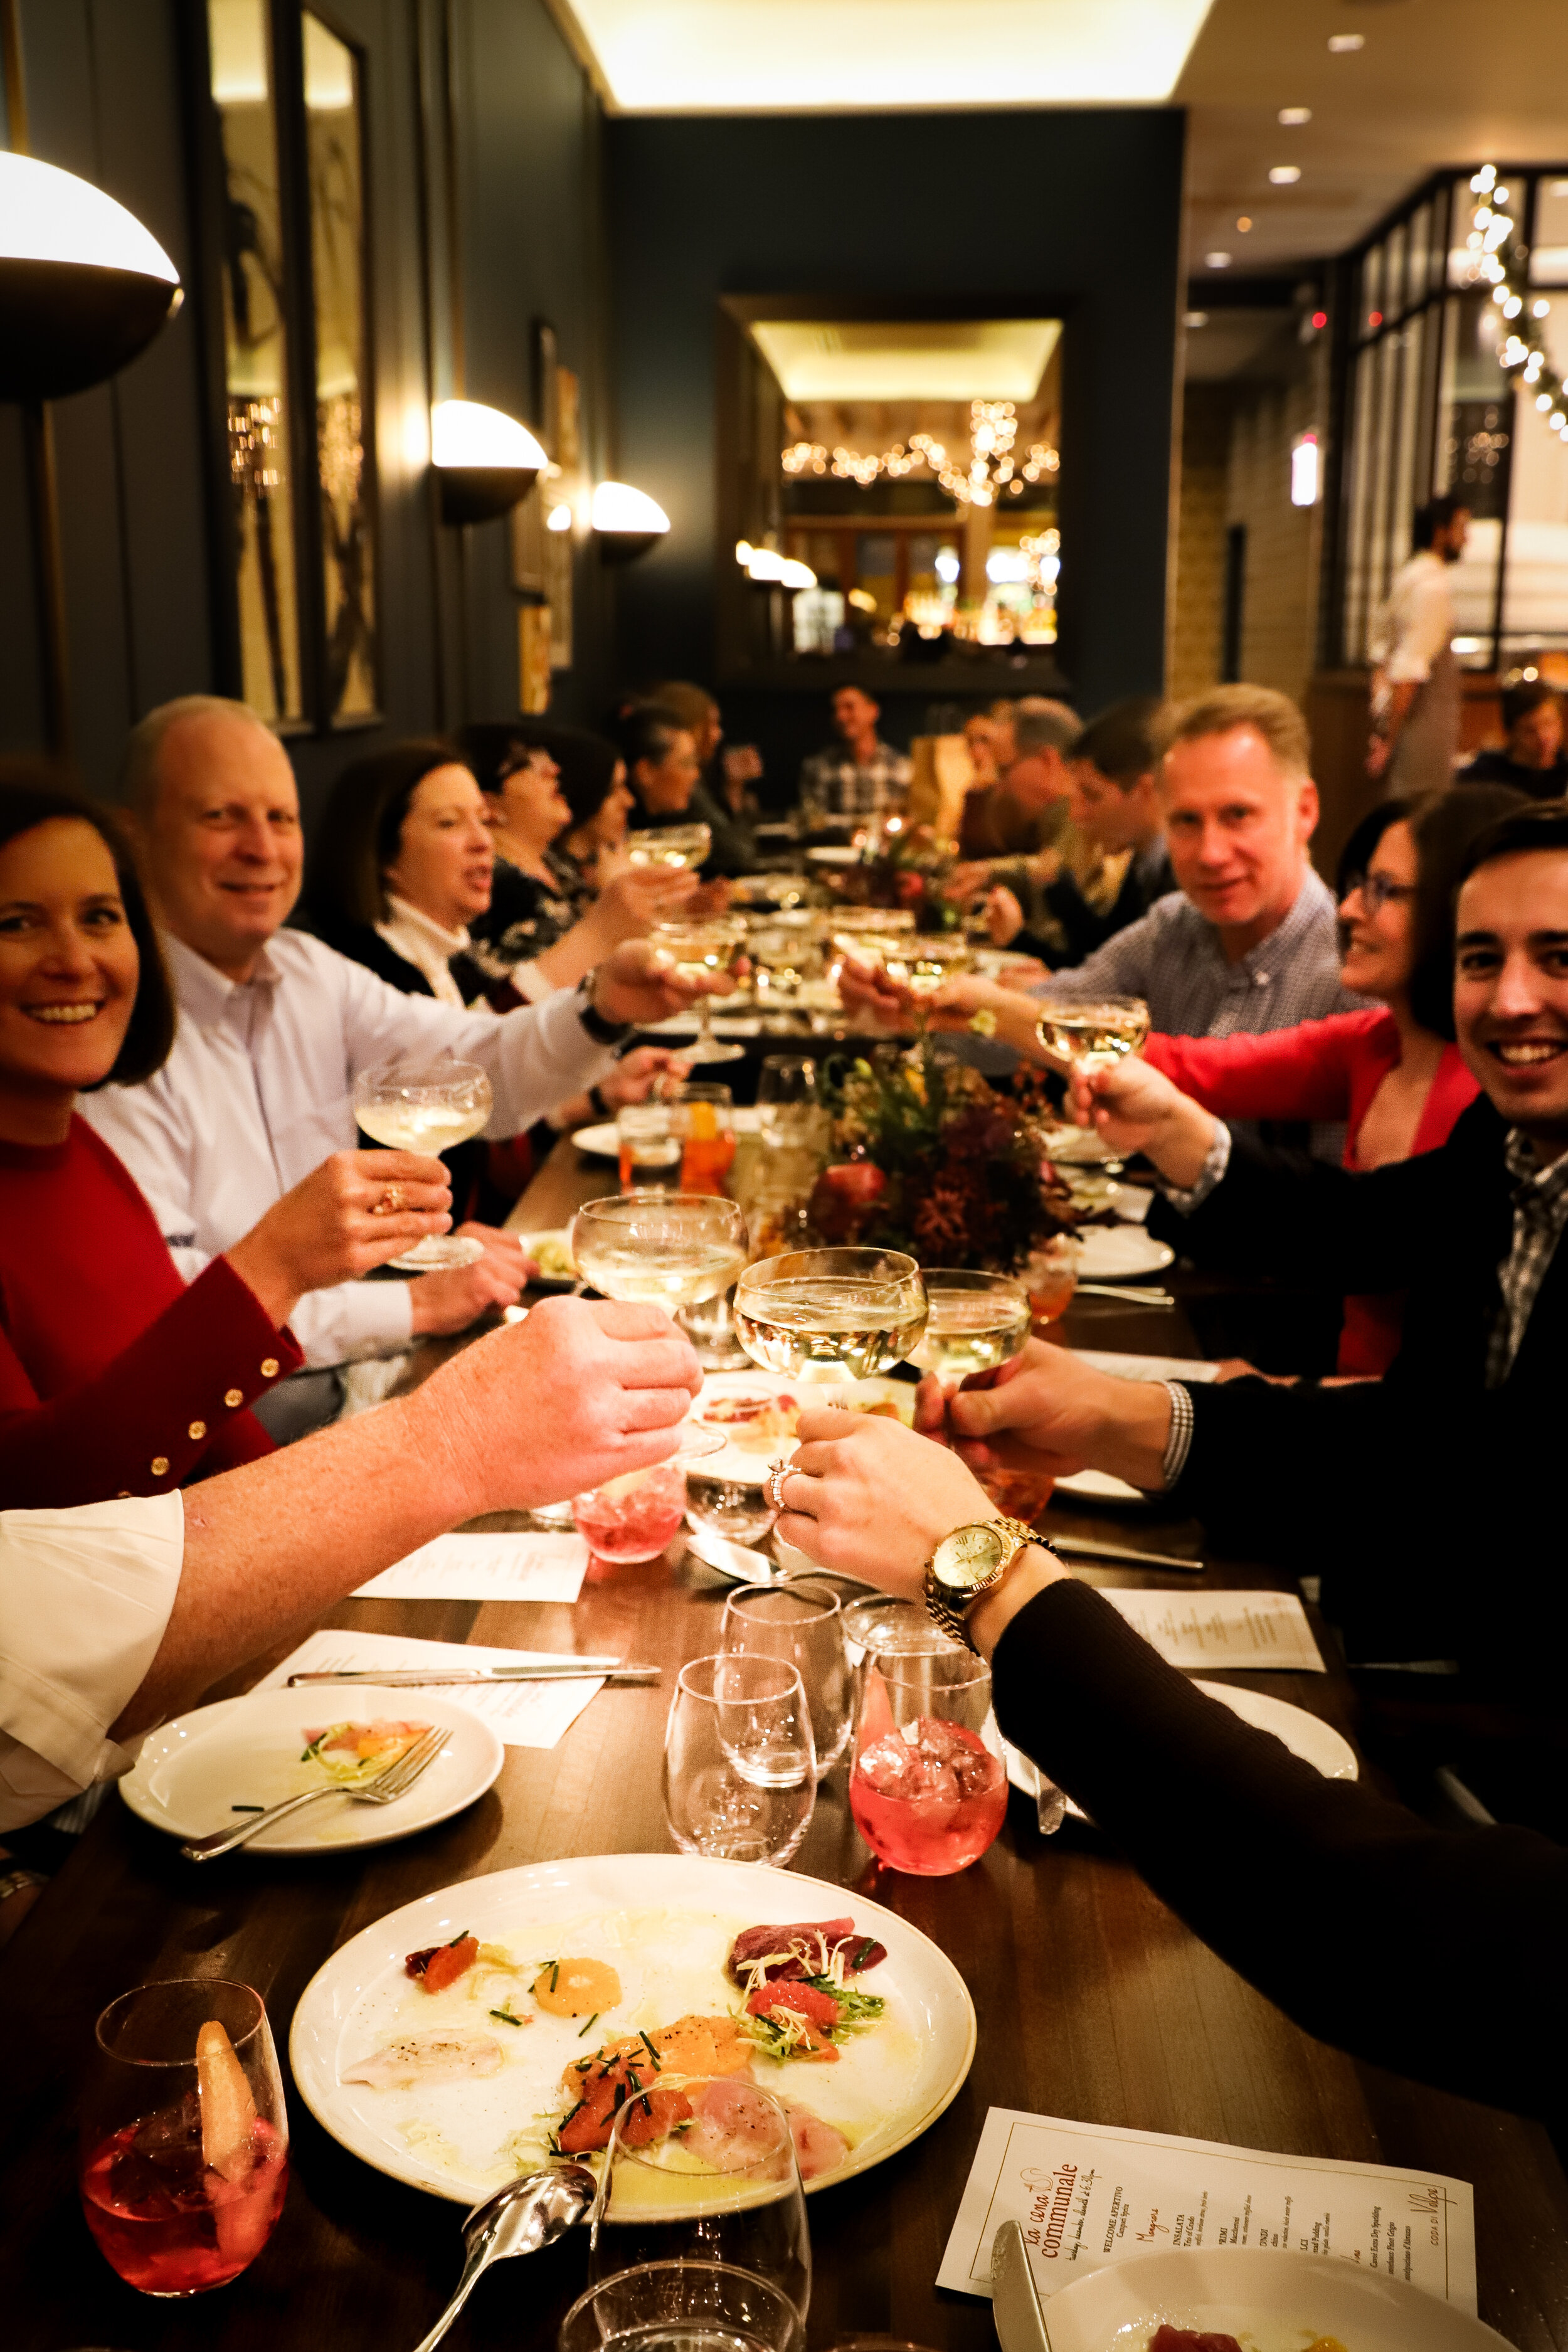 Another Angle: Guests raising their glasses, toasting in celebration at a private event.